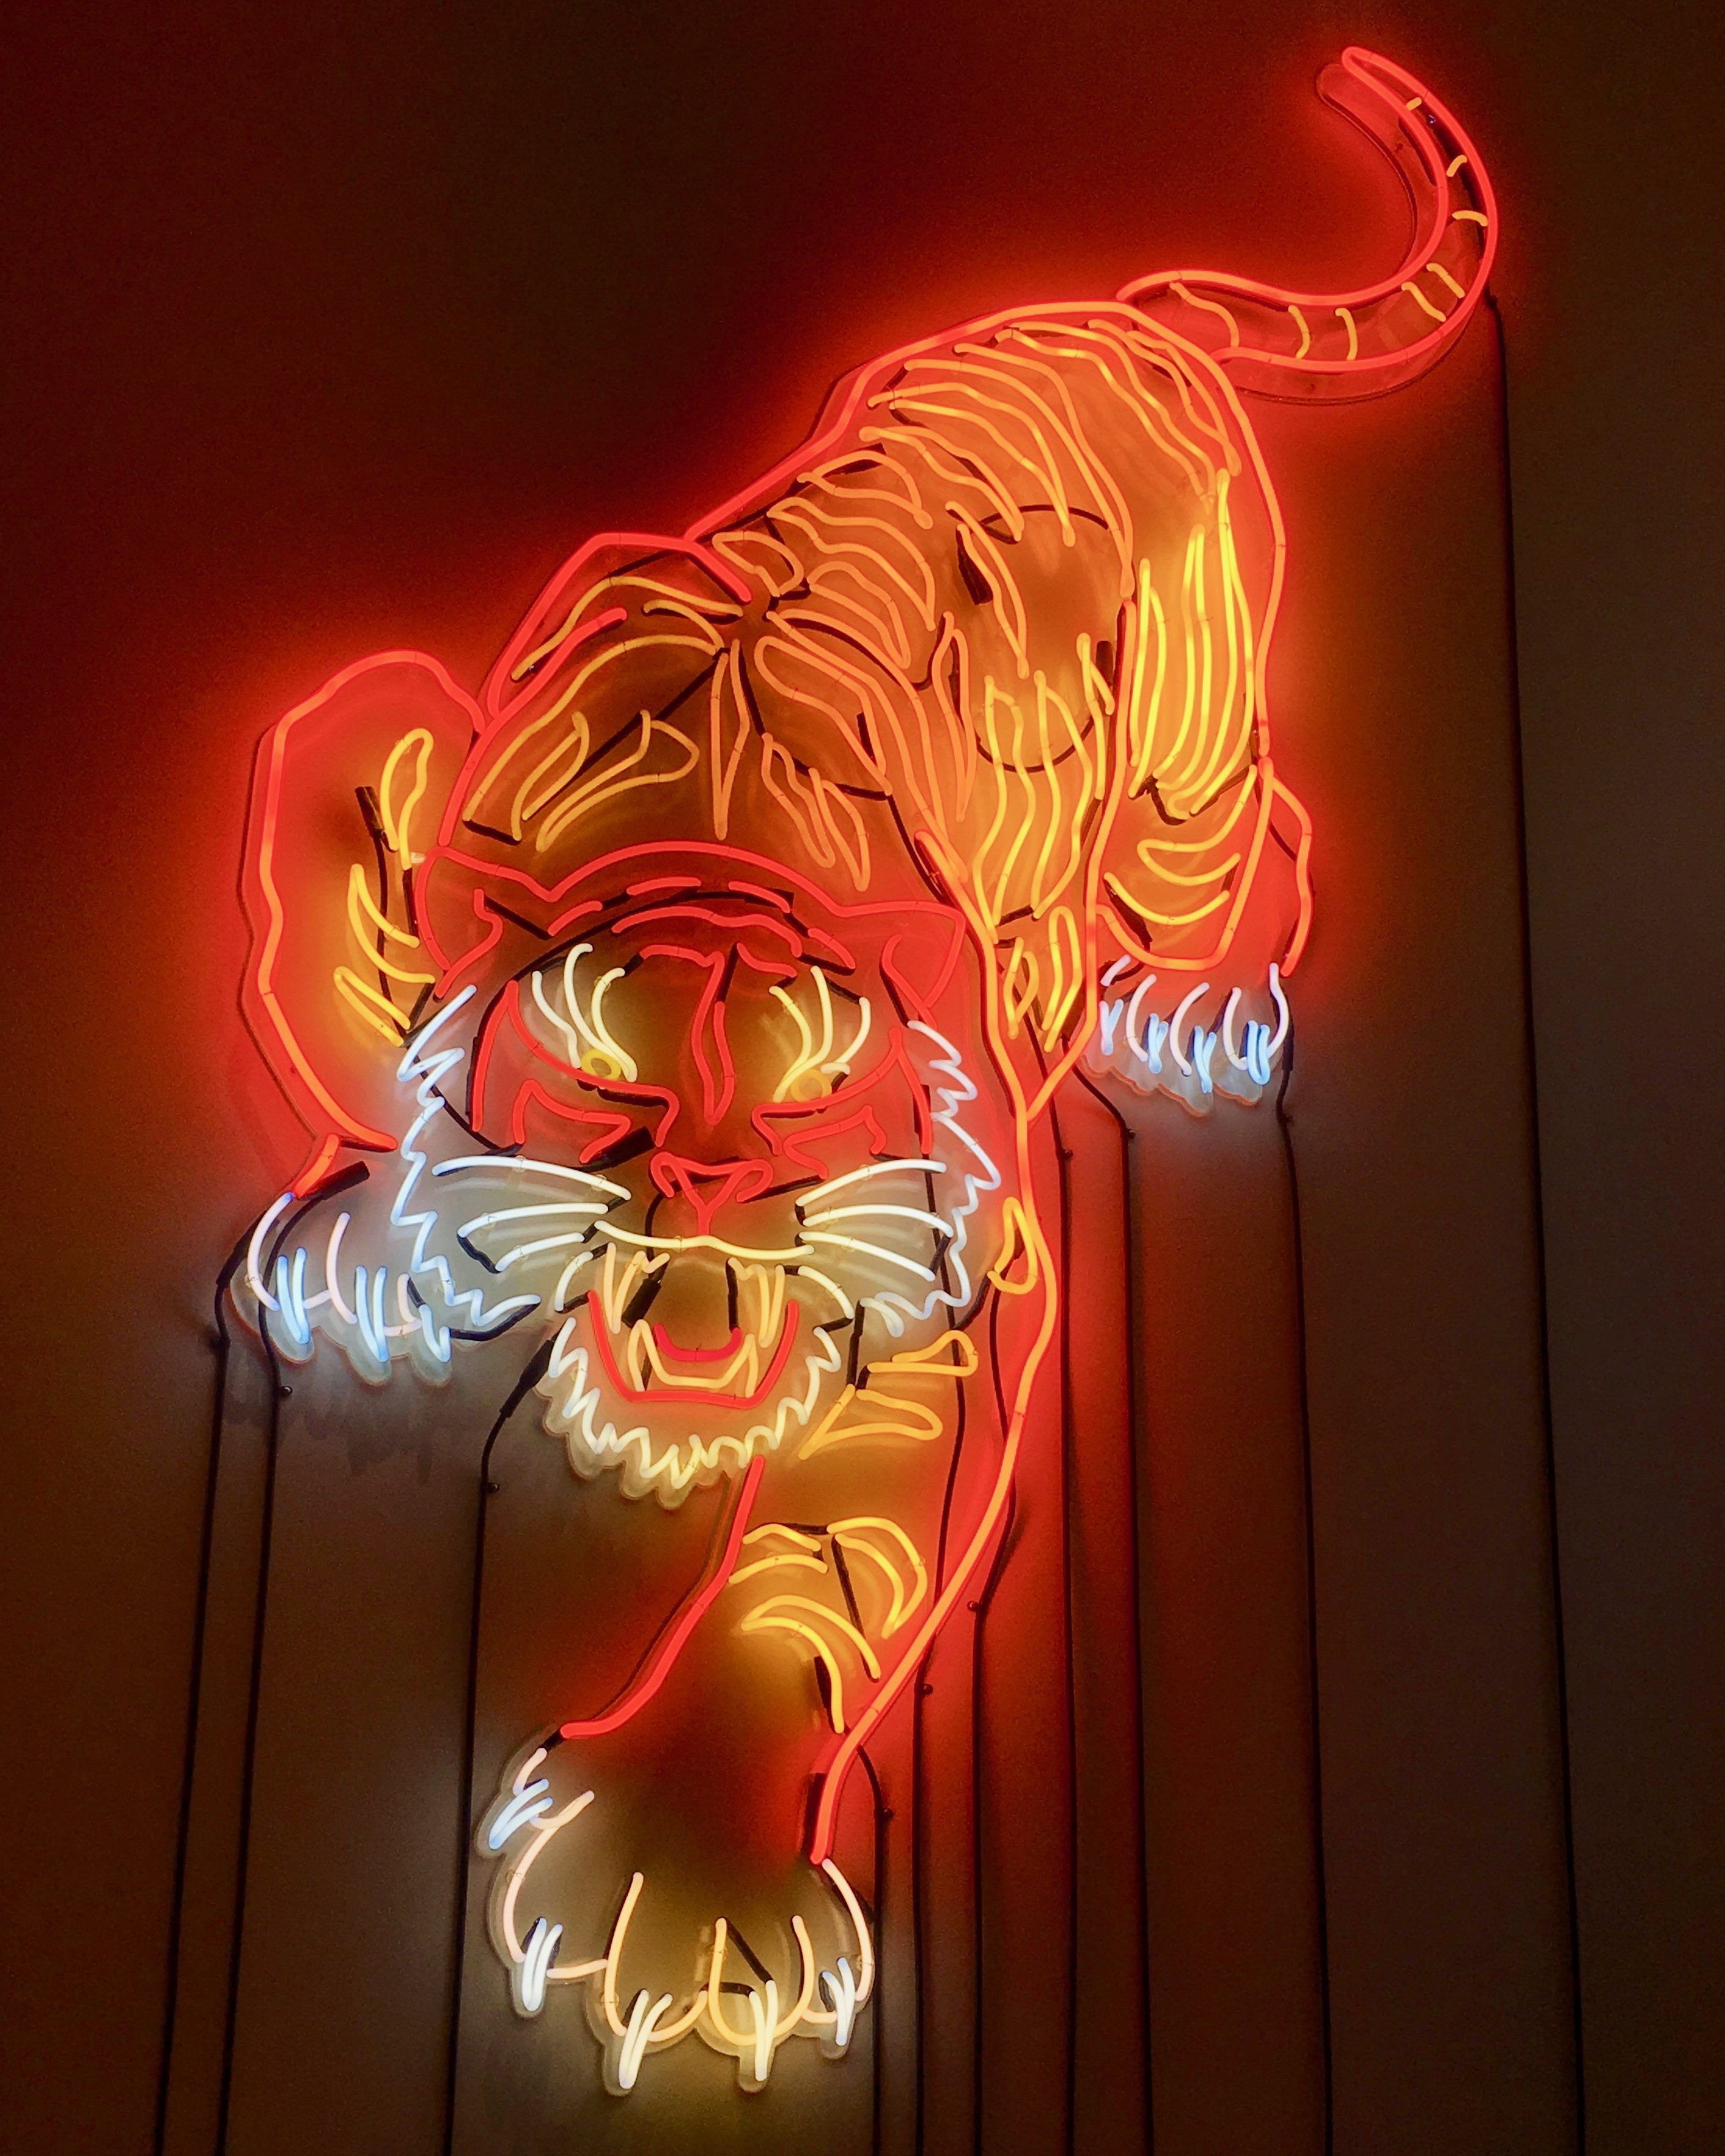 A neon tiger is on the wall - Neon orange